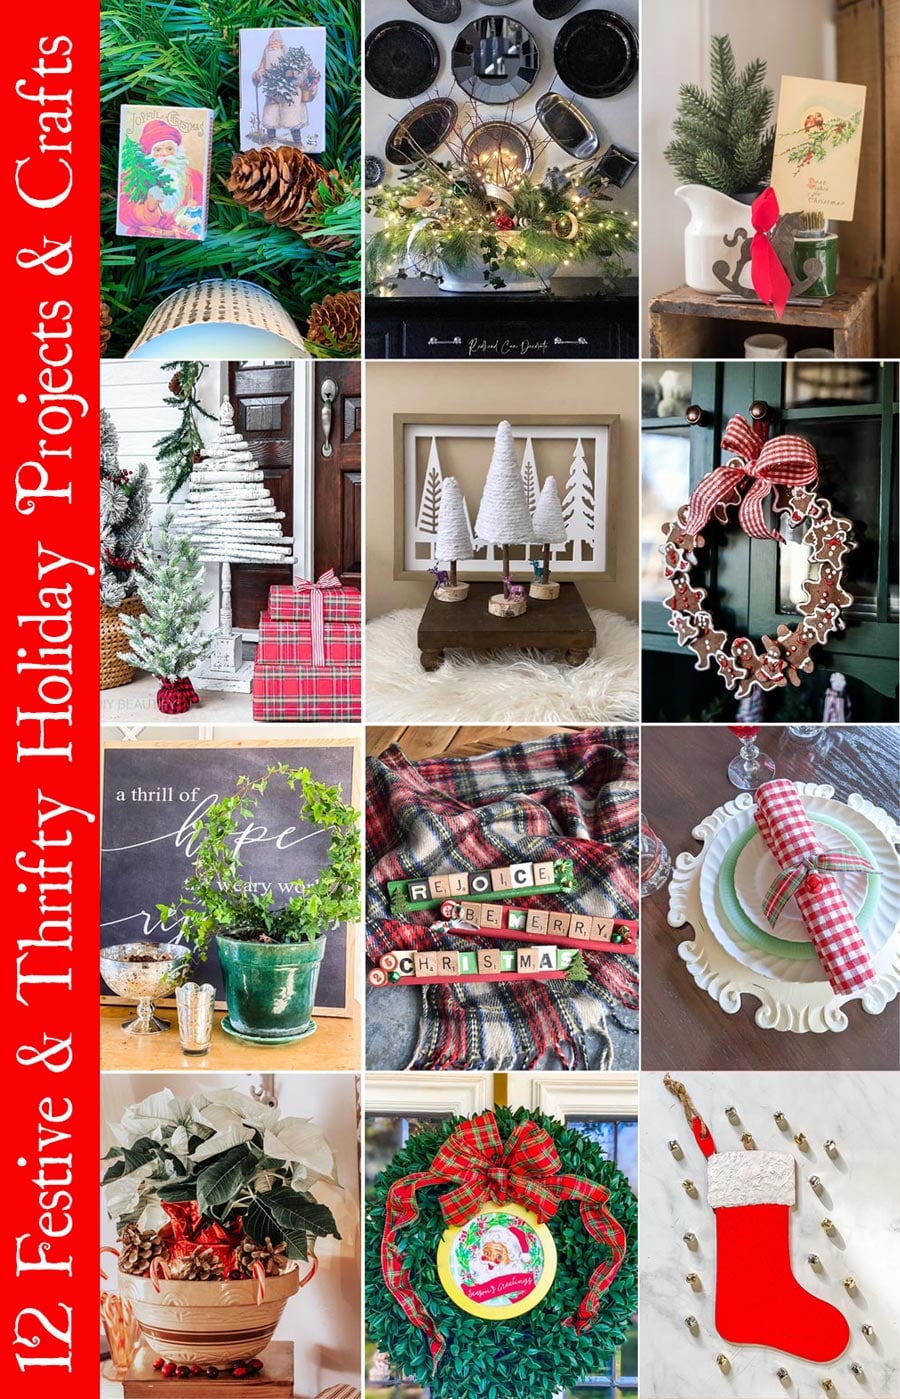 12 Festive and Thrifty Holiday Projects and Crafts